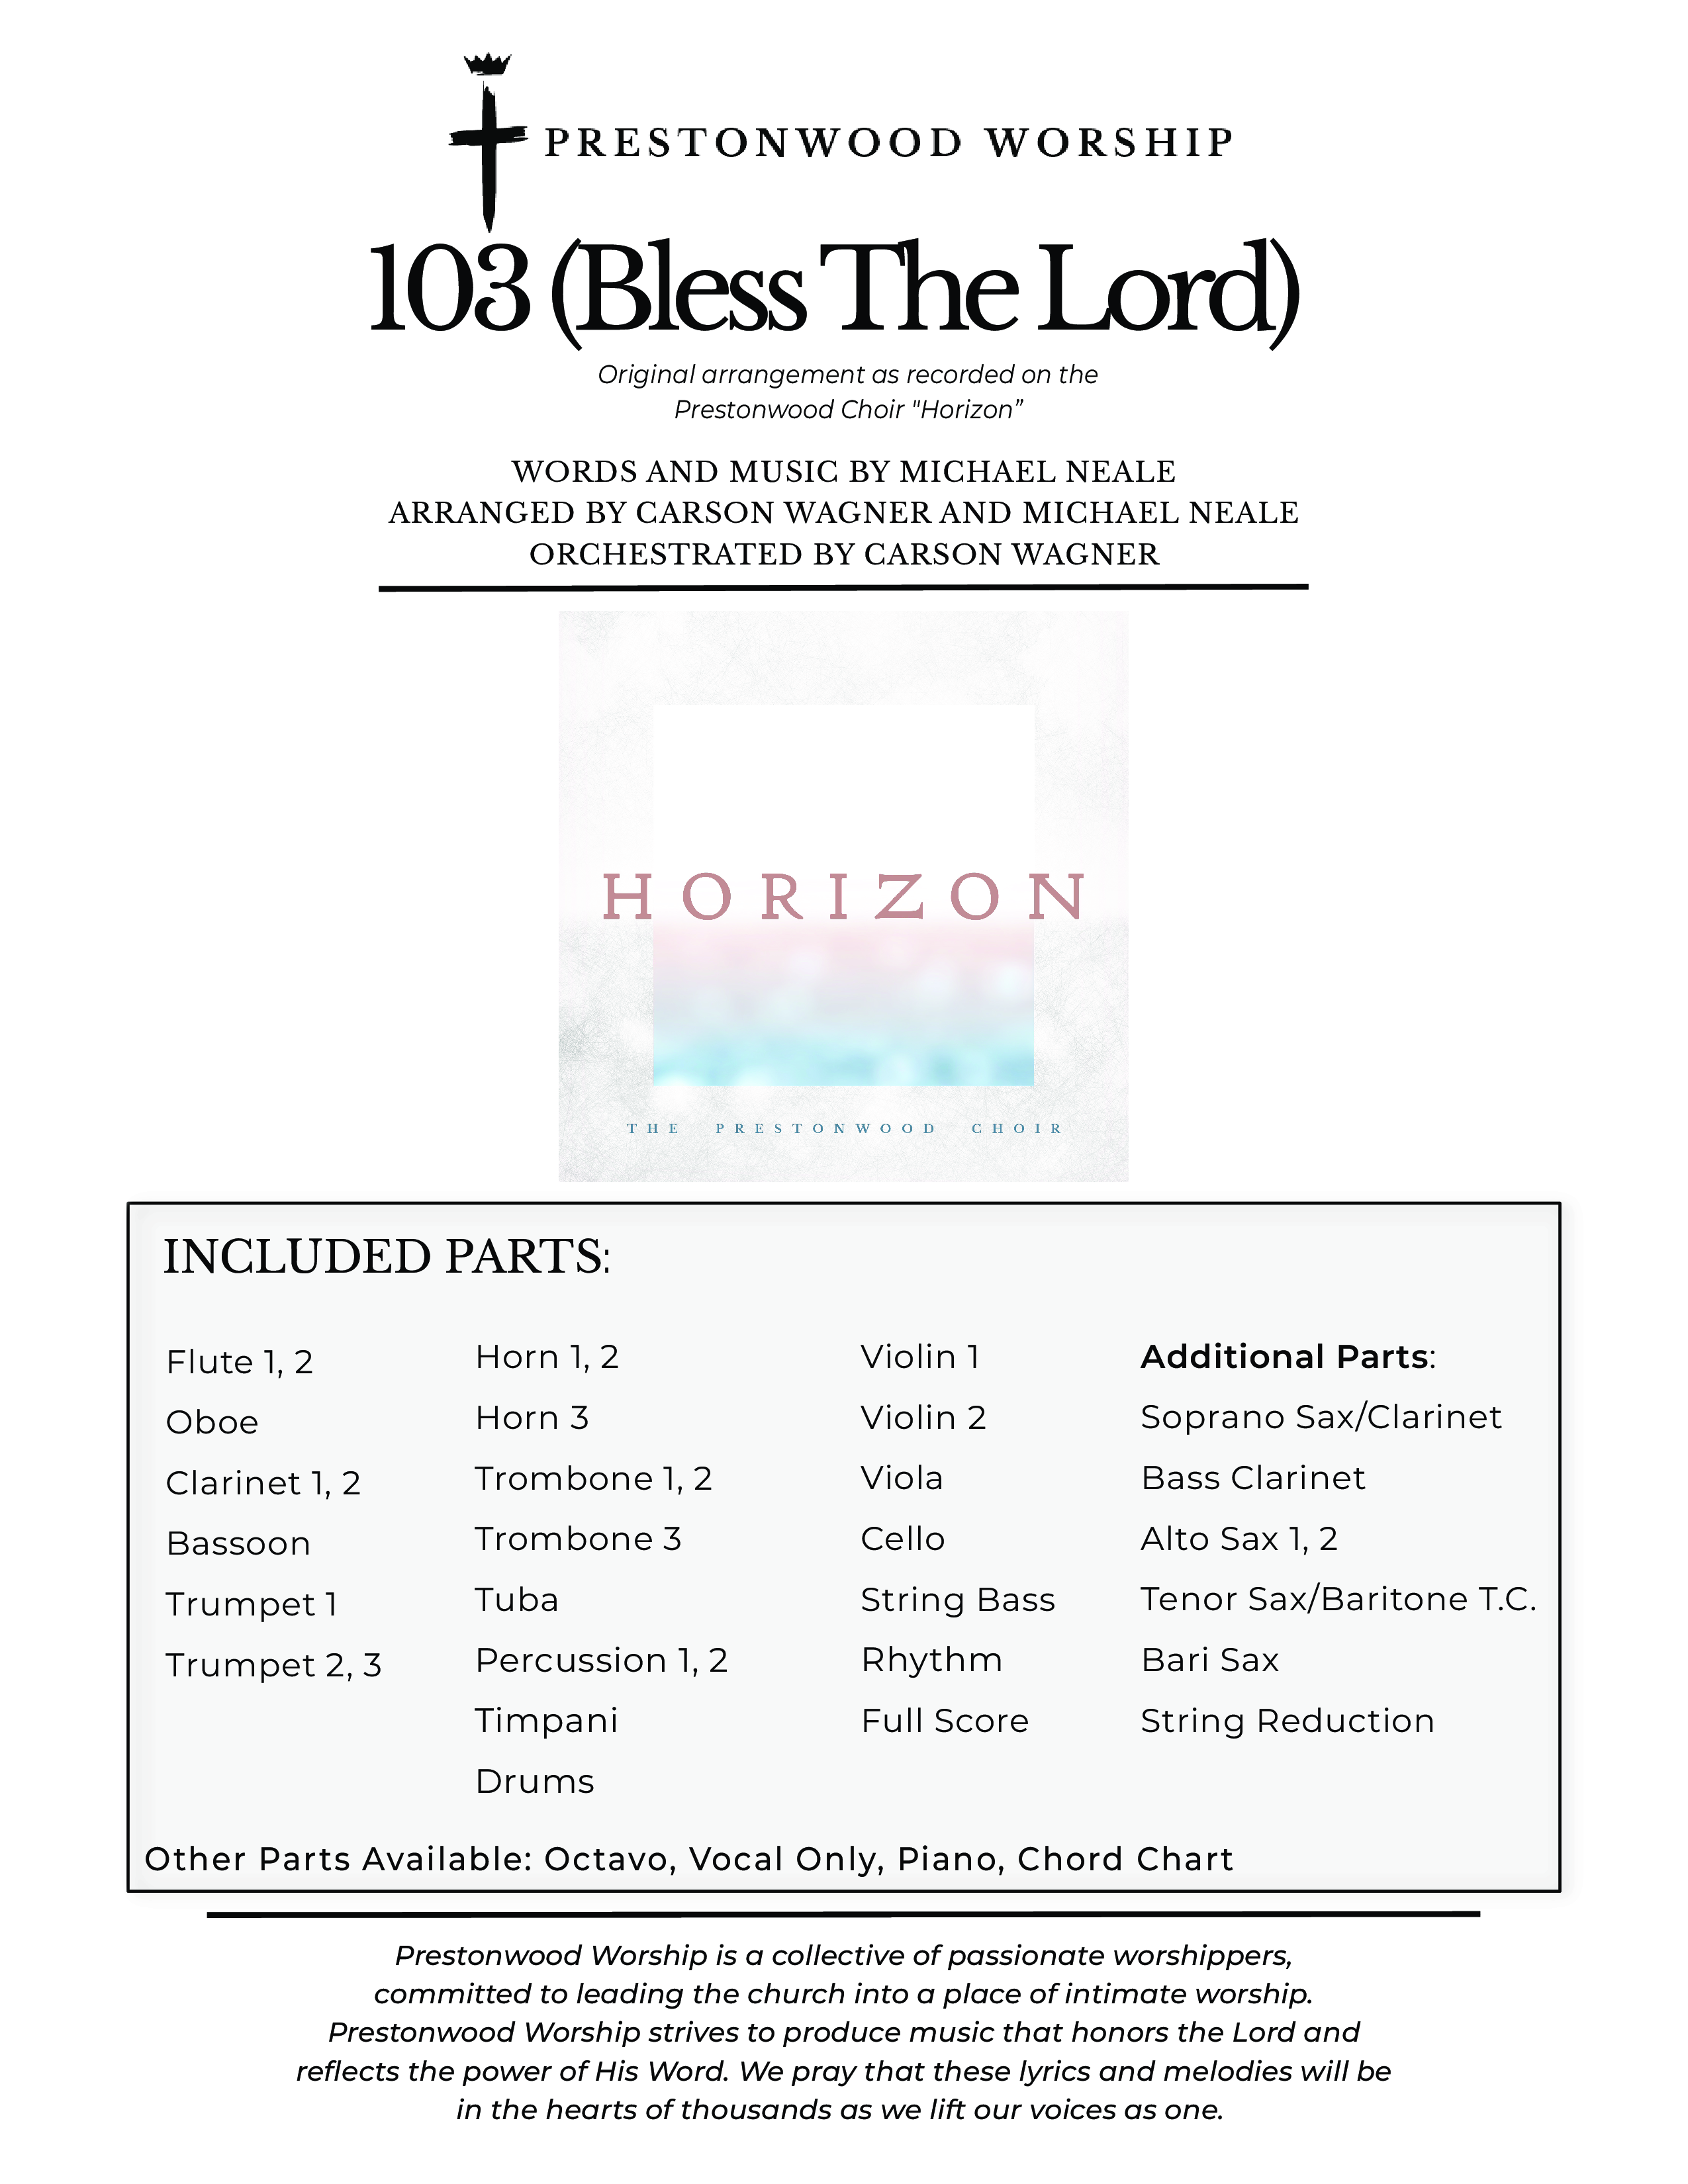 103 (Bless The Lord) (Choral Anthem SATB) Cover Sheet (Prestonwood Worship / Prestonwood Choir / Arr. Michael Neale / Orch. Carson Wagner)